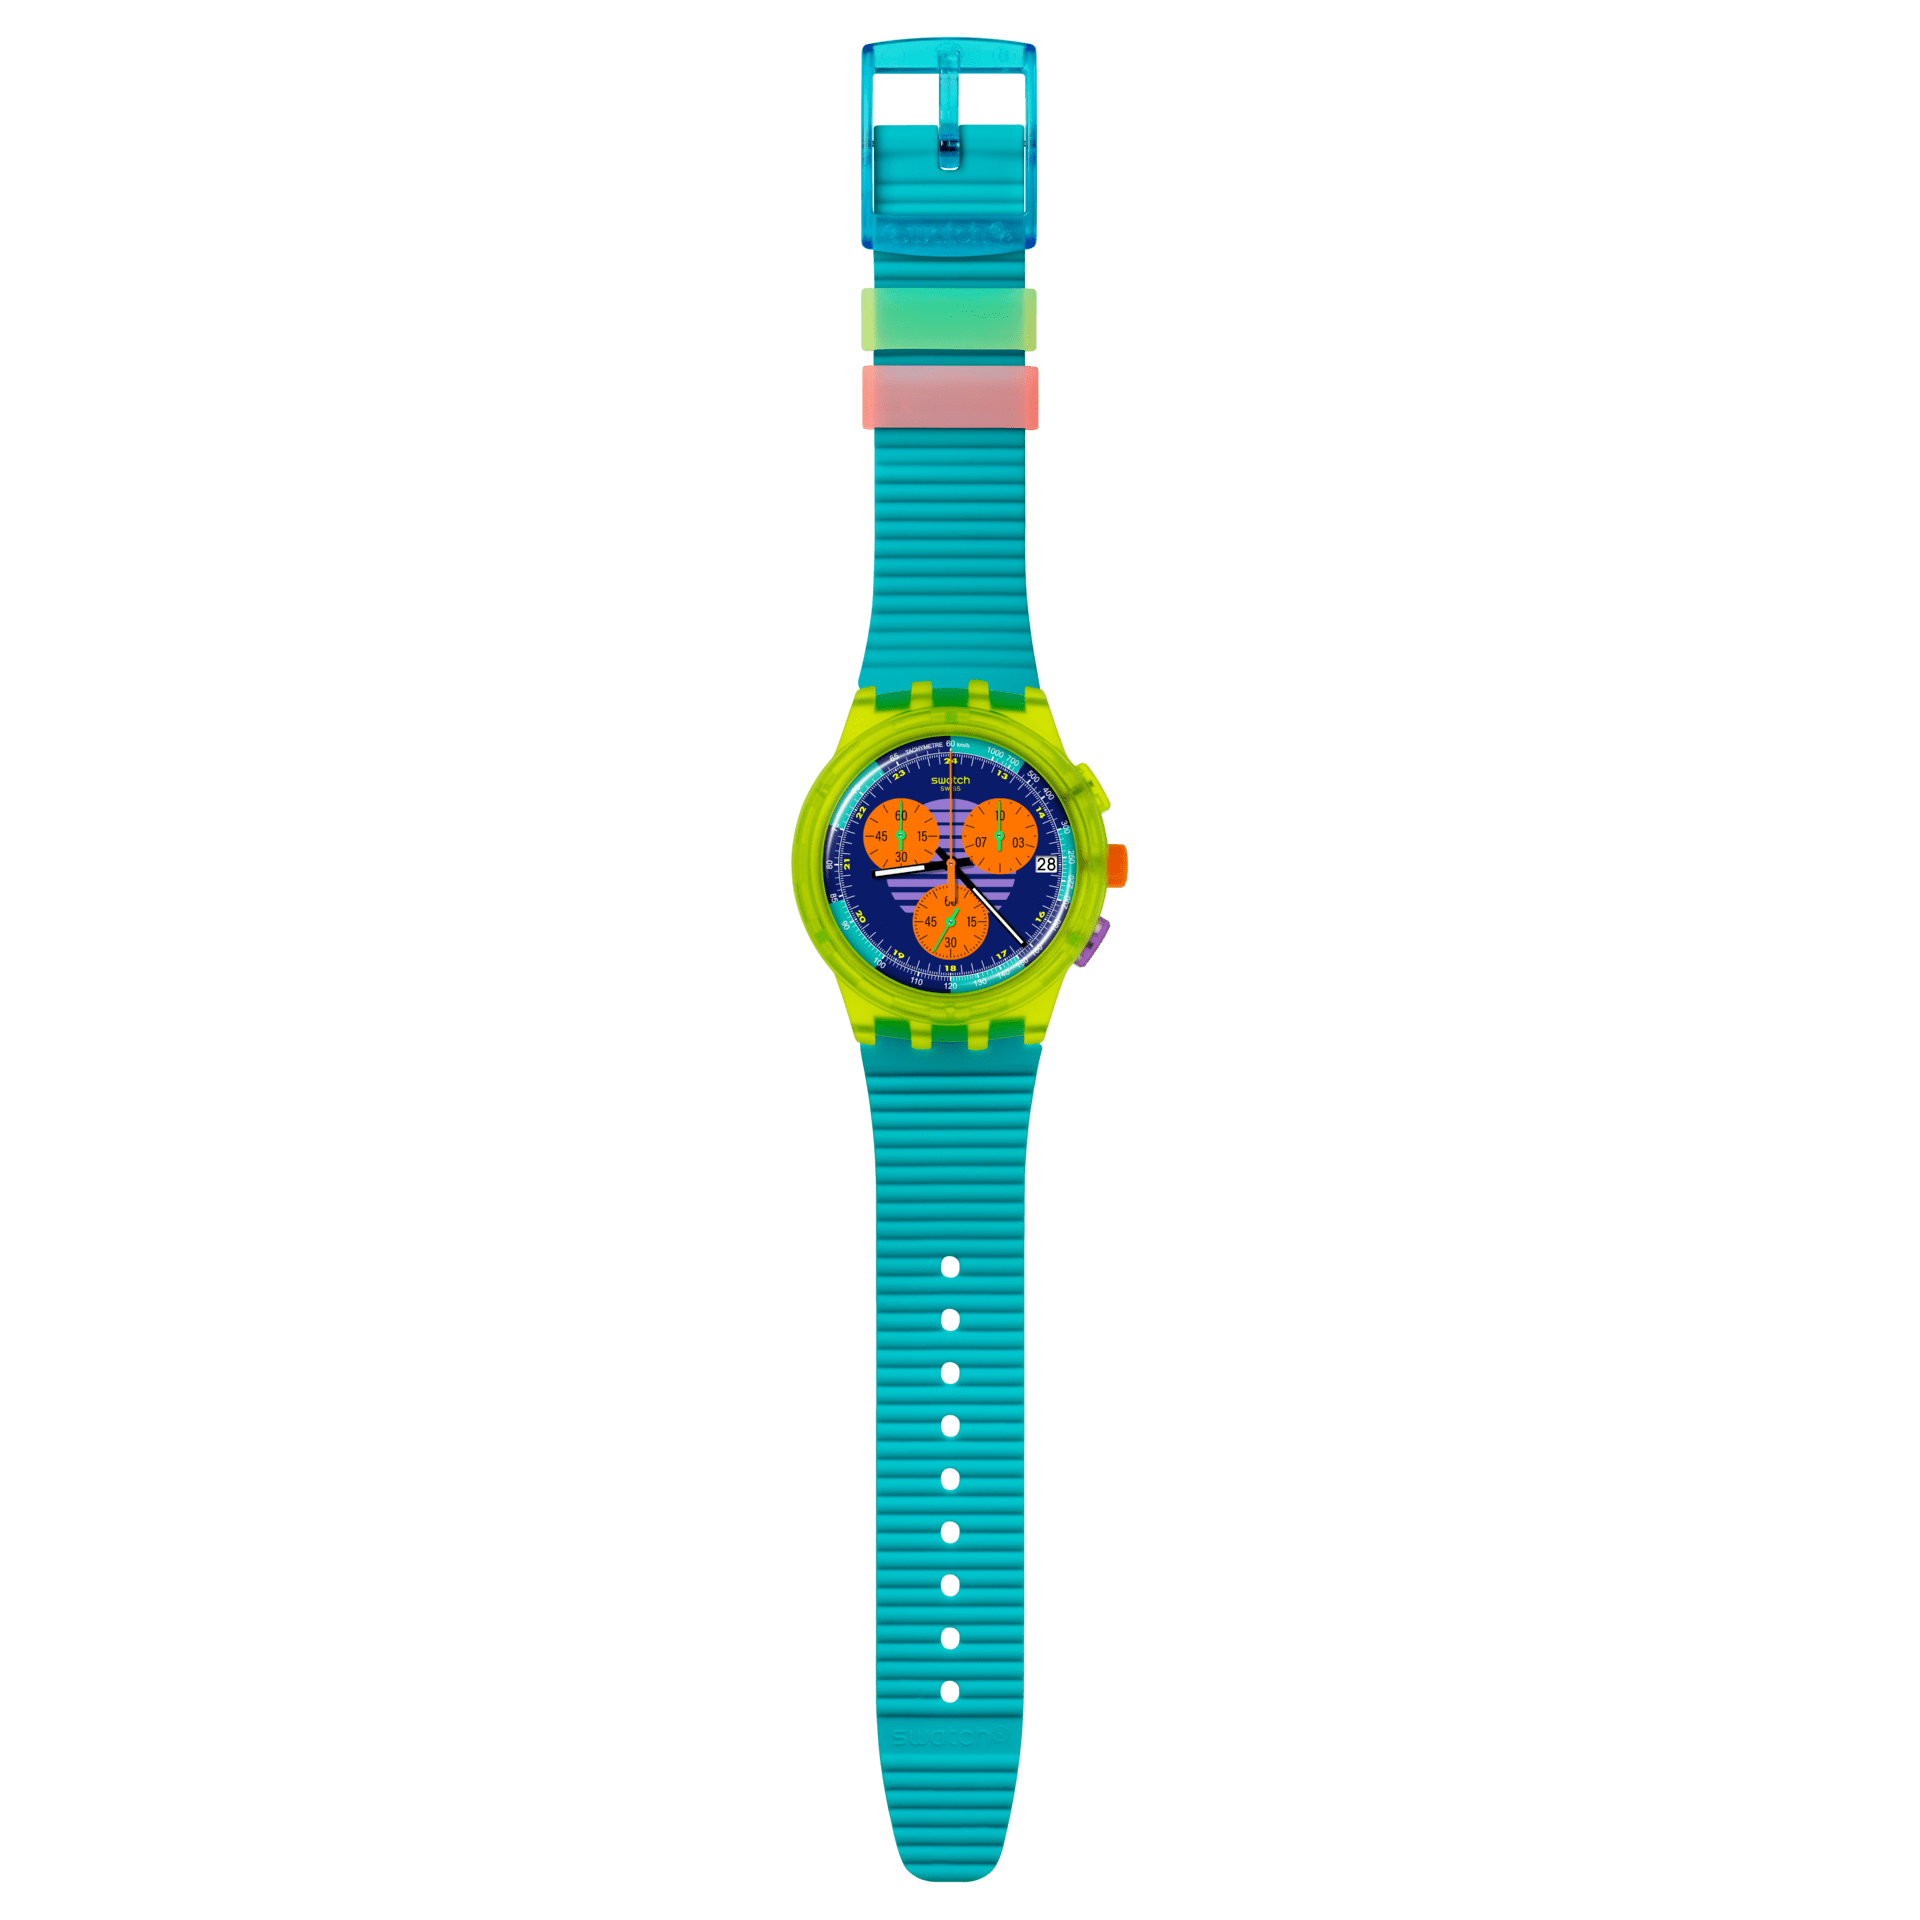 SWATCH NEON WAVE